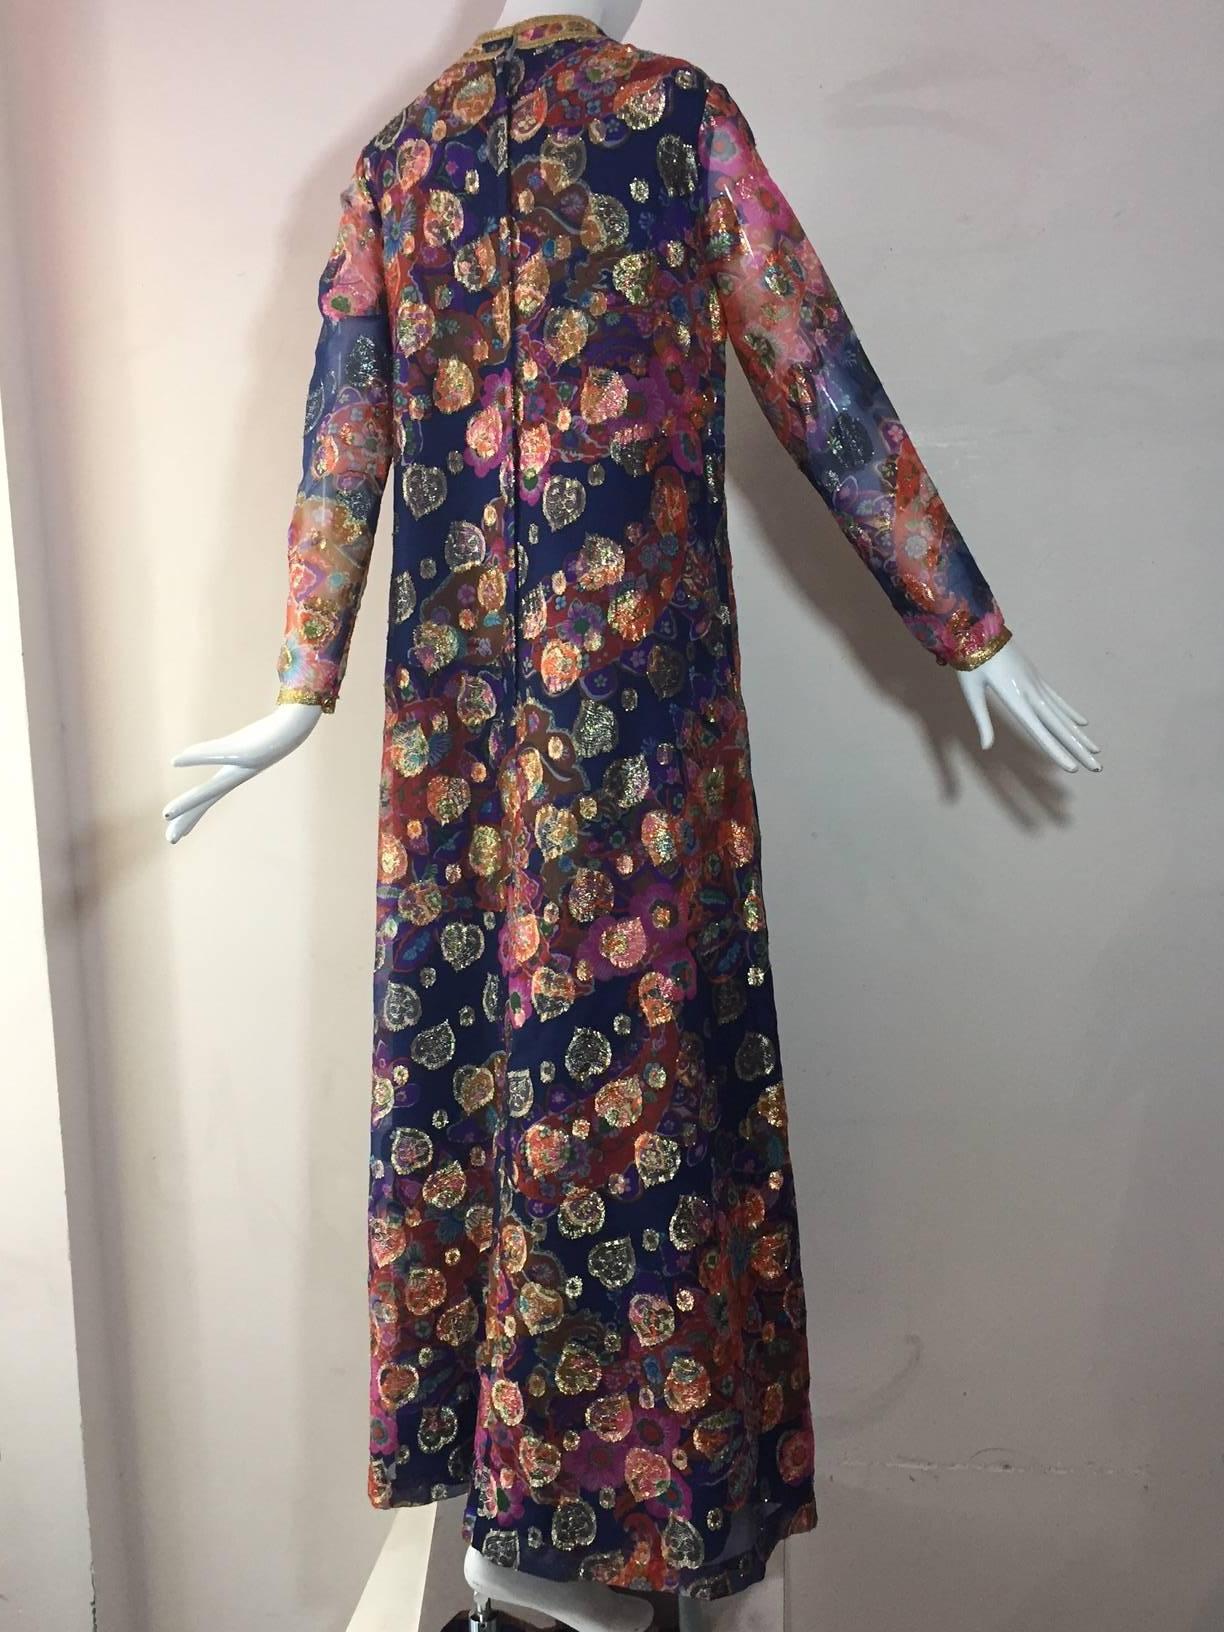 A fabulous sheer sleeved 1960s Saks Fifth Avenue kaleidoscopic lame hostess gown:  Banded collar, Fully lined, back zip. Side pockets. 